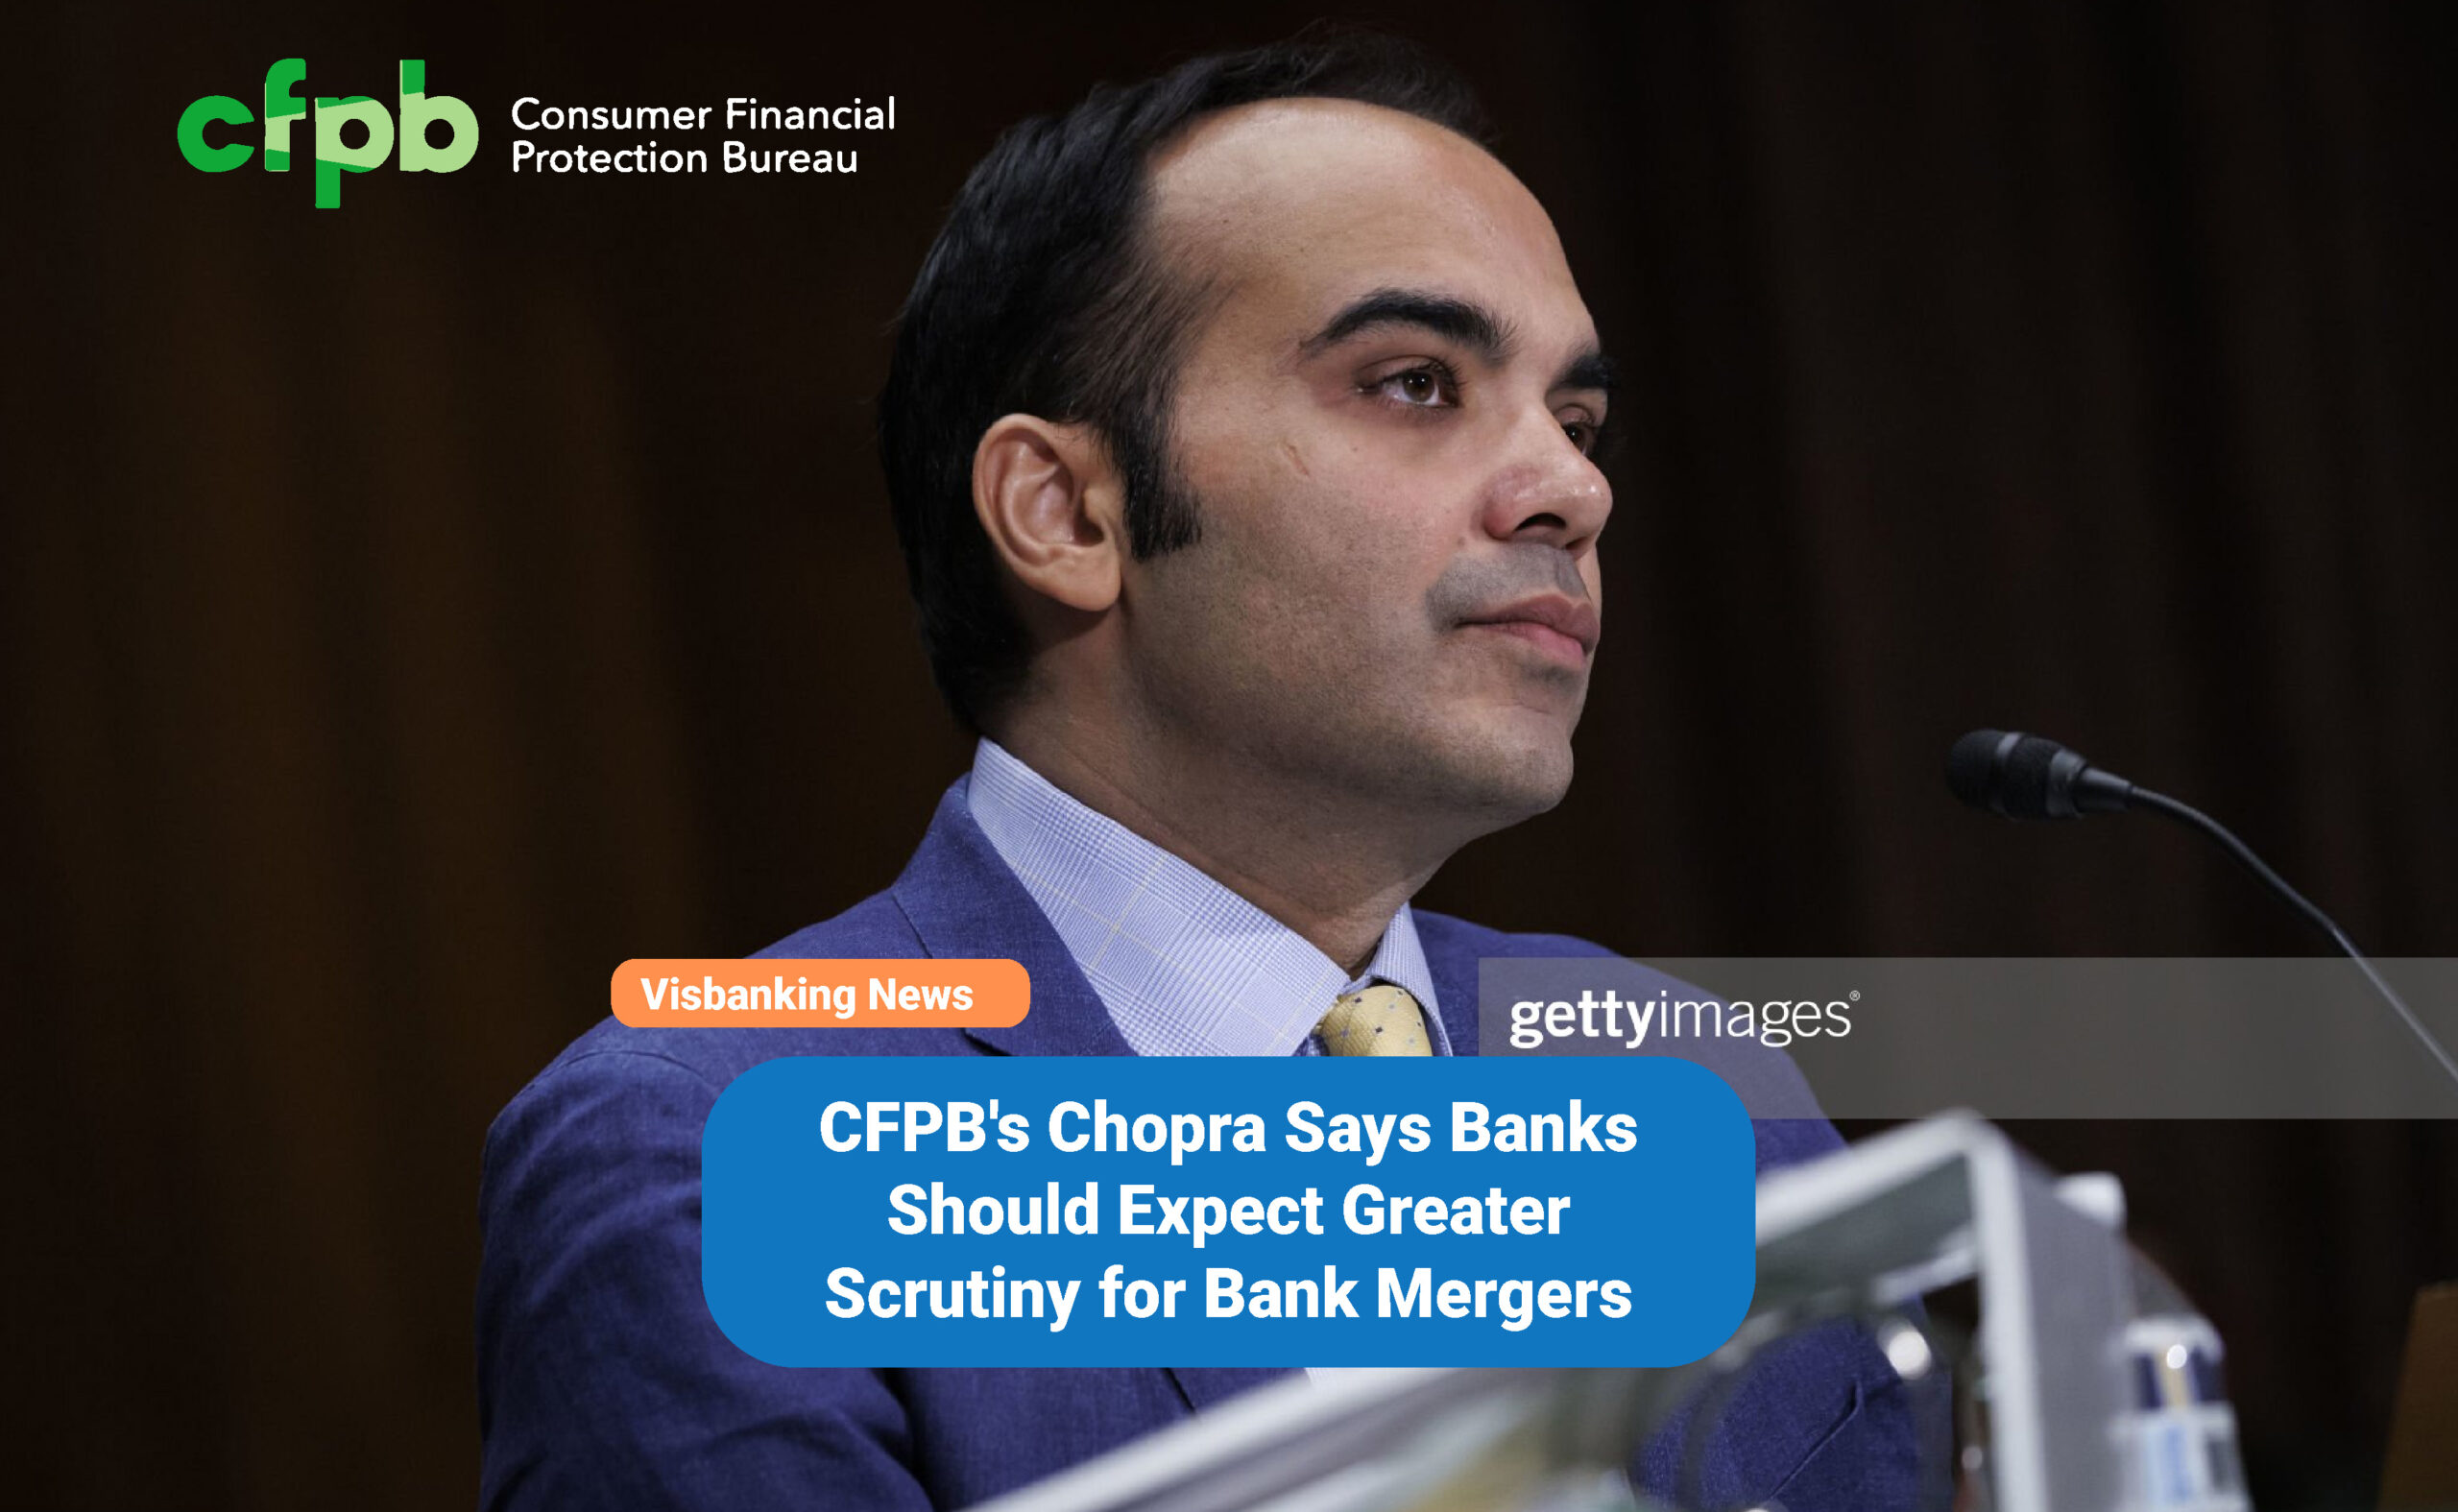 CFPB’s Chopra Says Banks Should Expect Greater Scrutiny for Bank Mergers